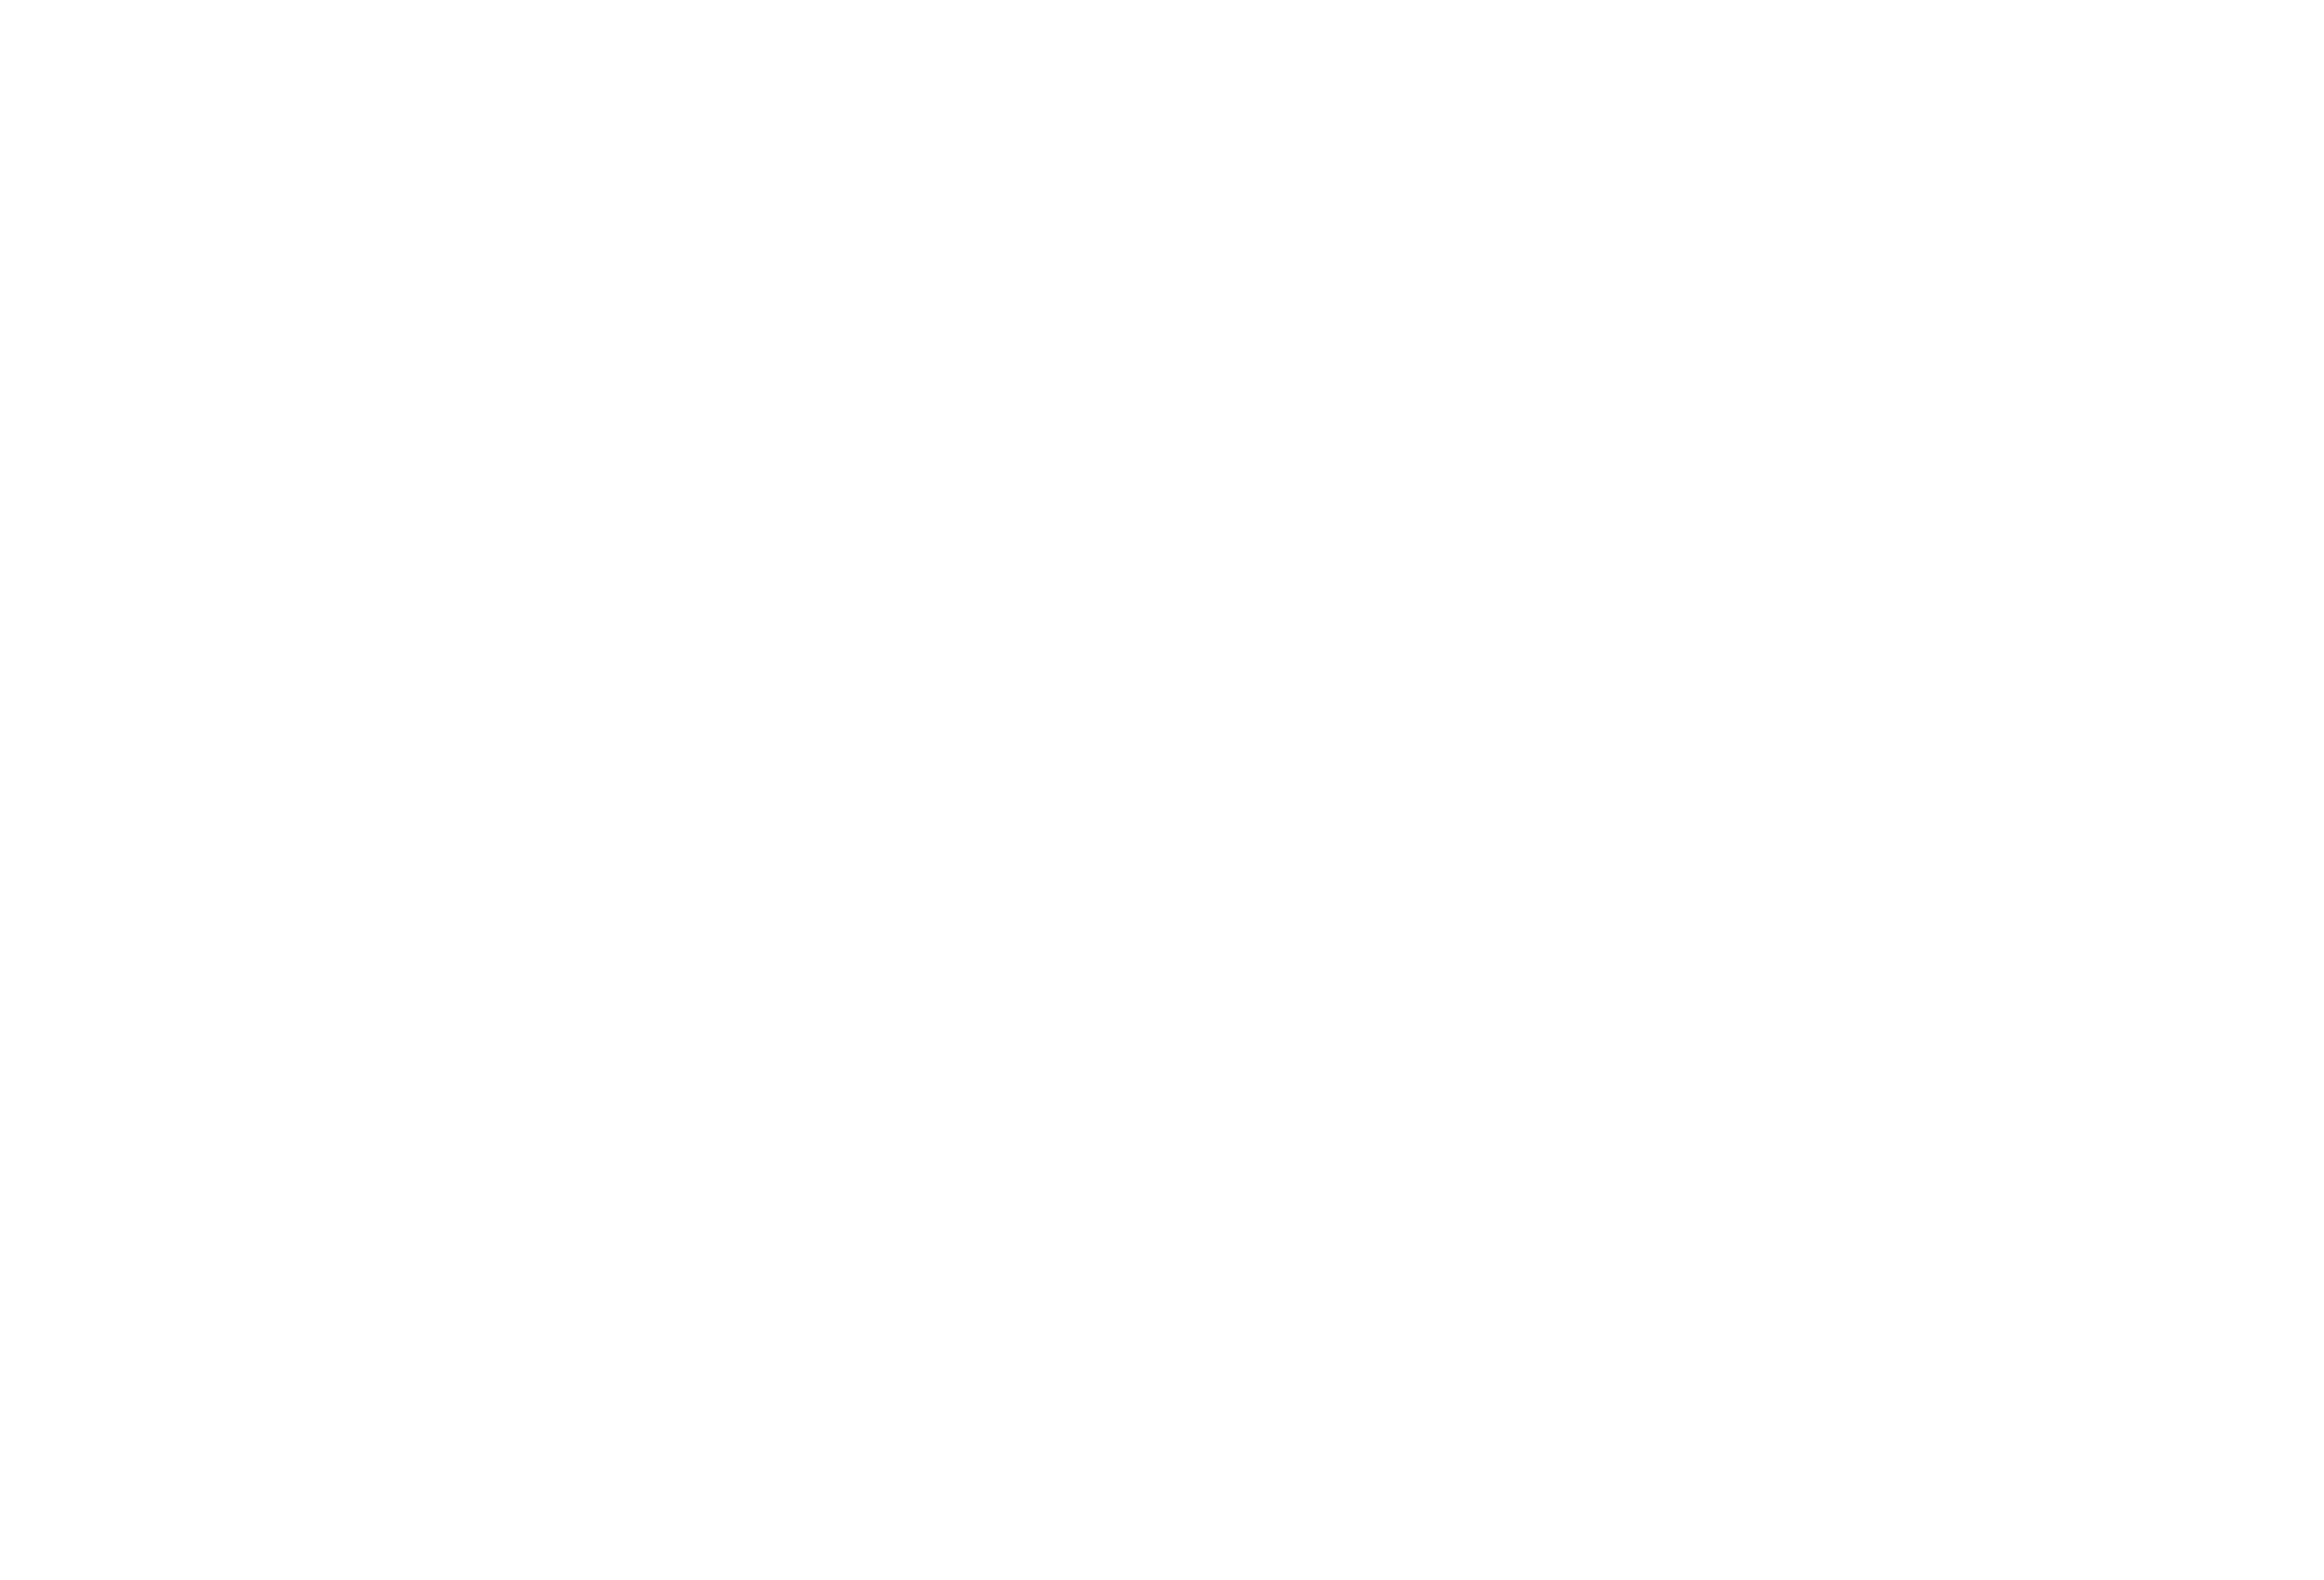 Trust has a name - Hospice in Nursing Homes